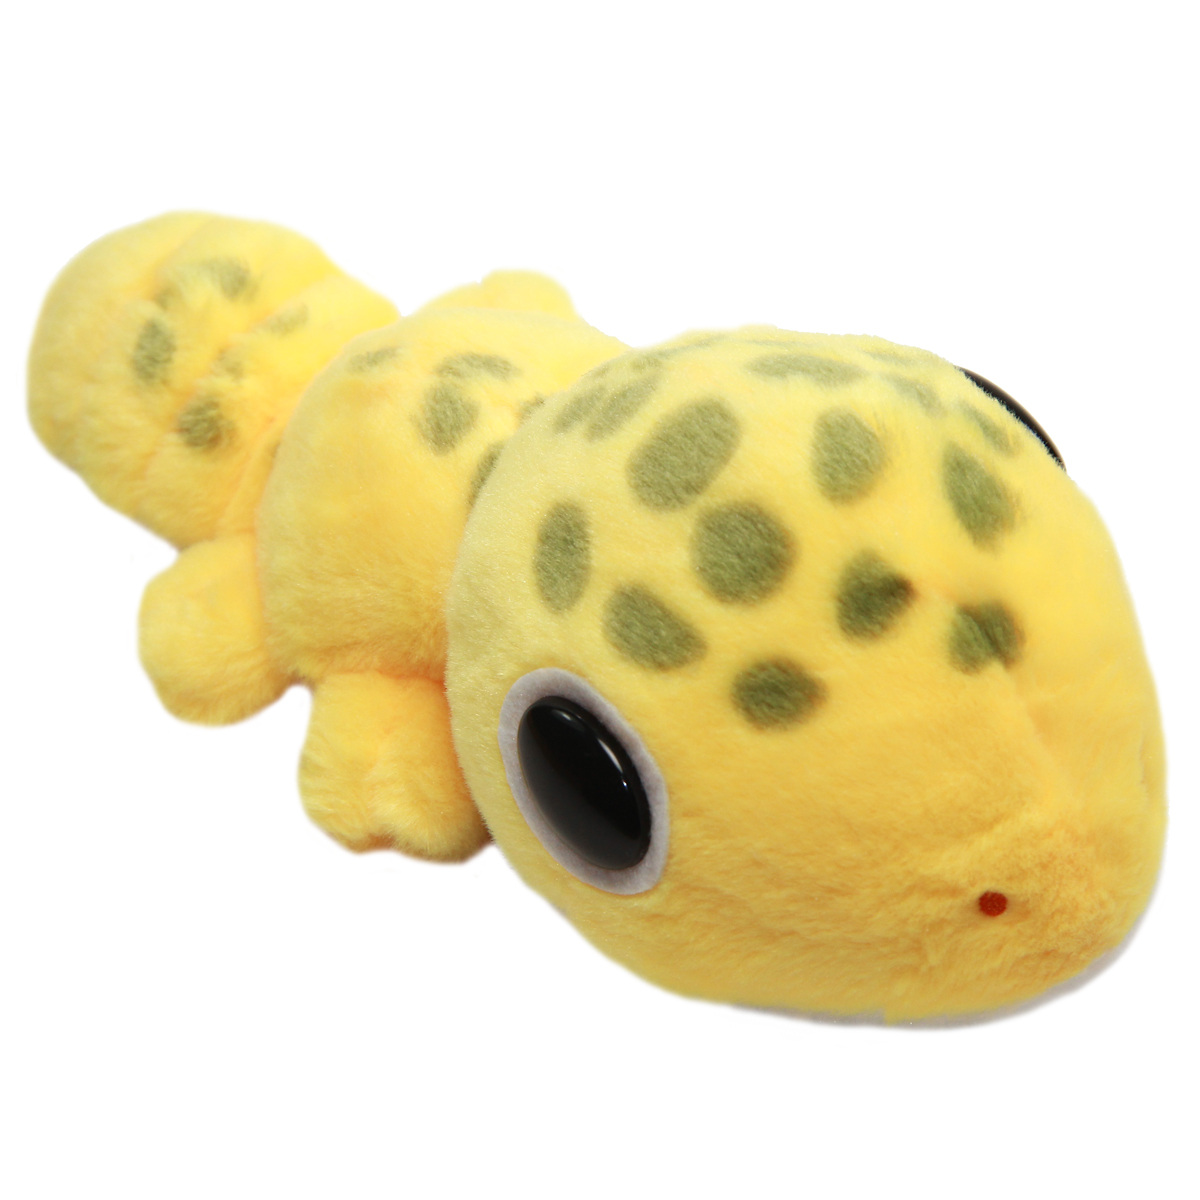 Leopard Gecko Plushie Super Soft Squishy Stuffed Animal Toy Yellow Size 8 Inches